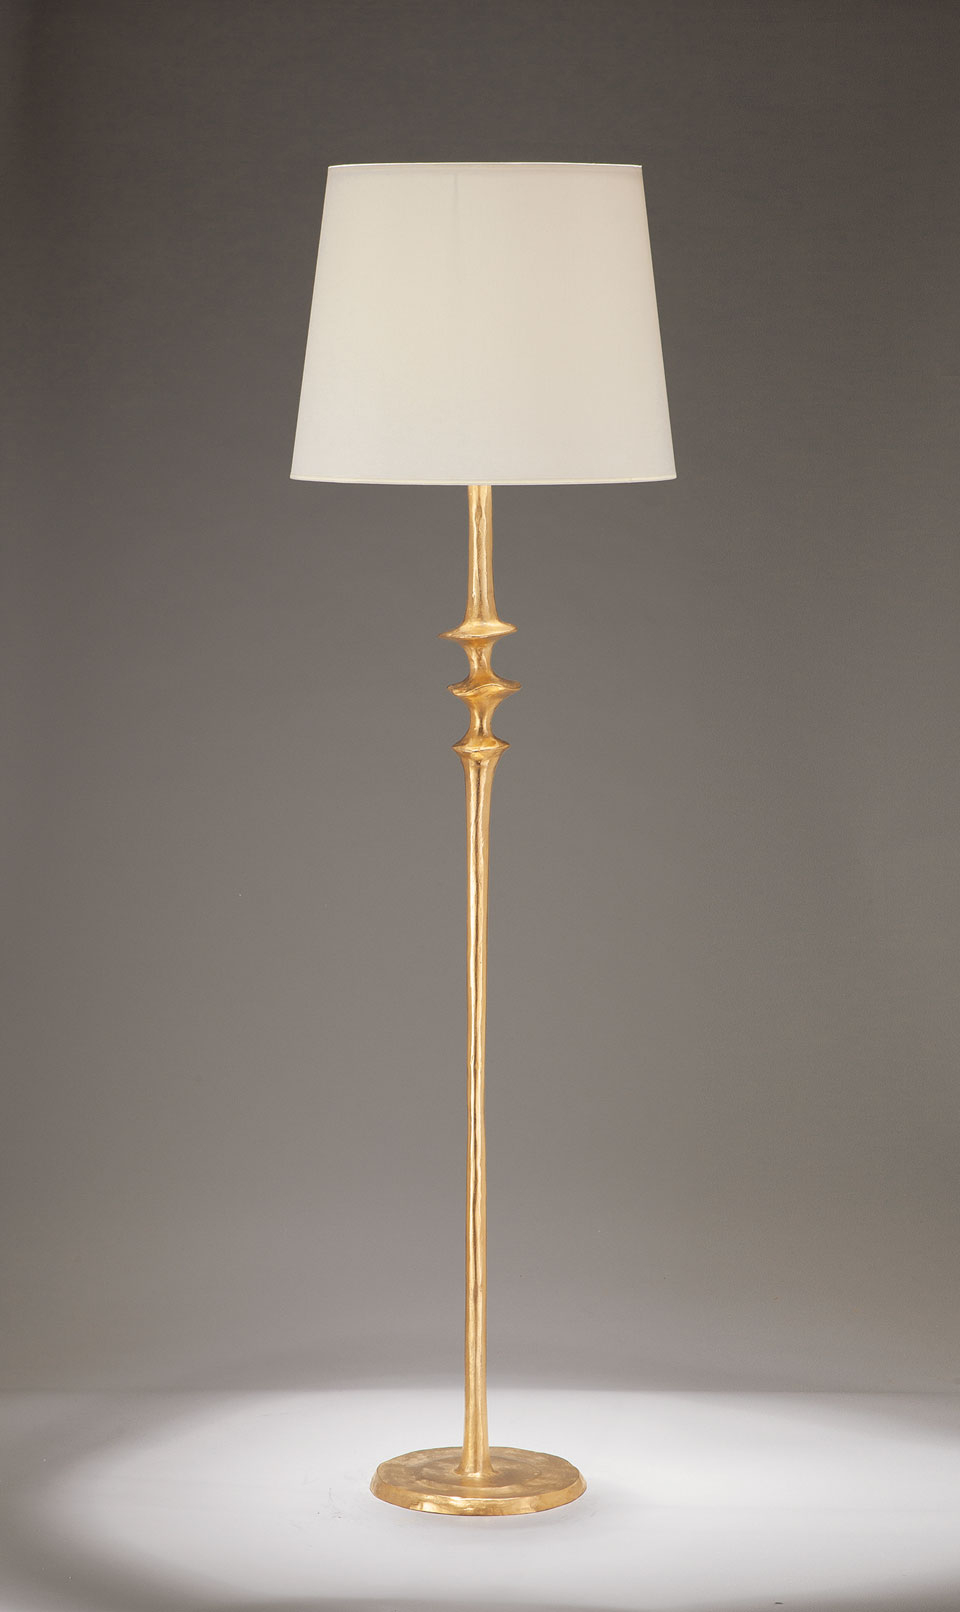 Floor Lamp With Large White Shade Available In Black And Satin Nickel regarding proportions 960 X 1612